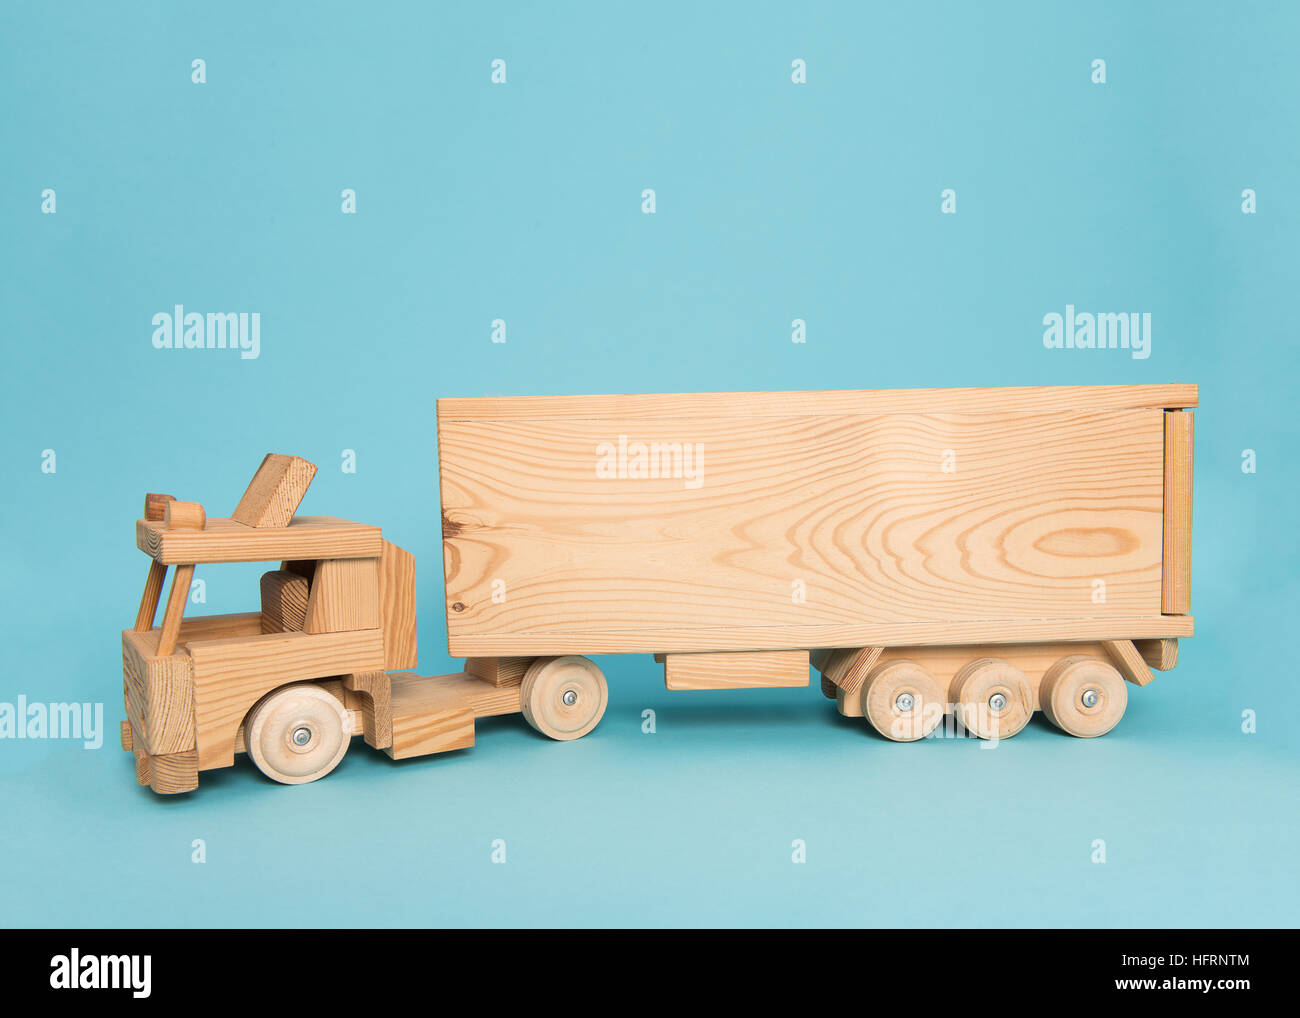 Wooden toy truck on a blue background Stock Photo